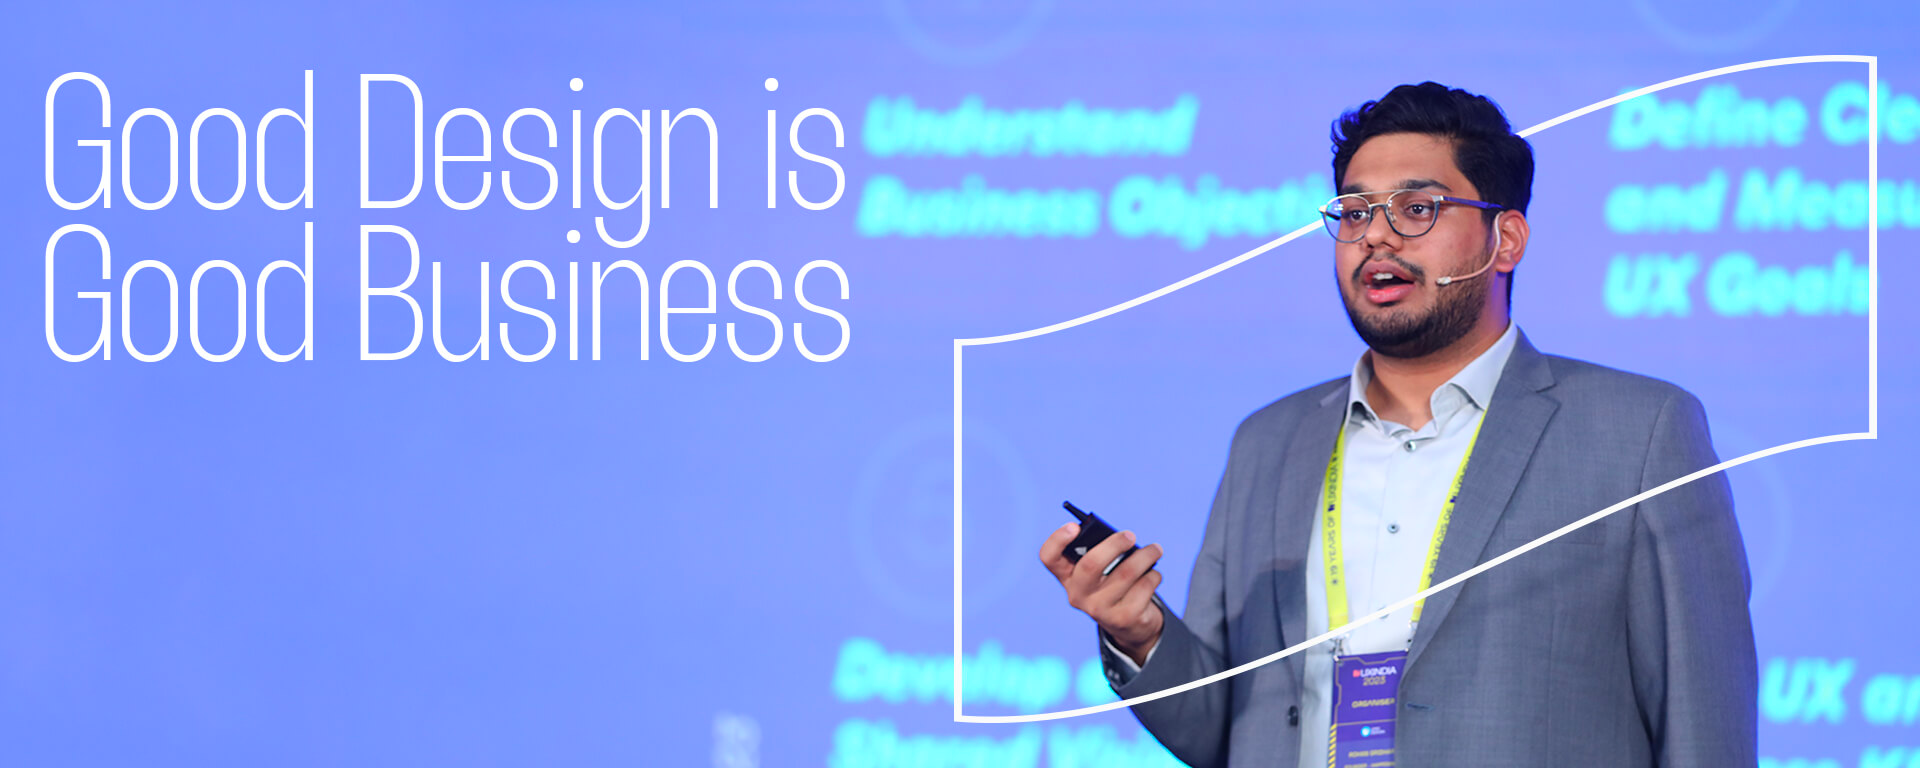 Good Design is Good Business – Watch Rohan Sridhar’s Keynote at UXINDIA23